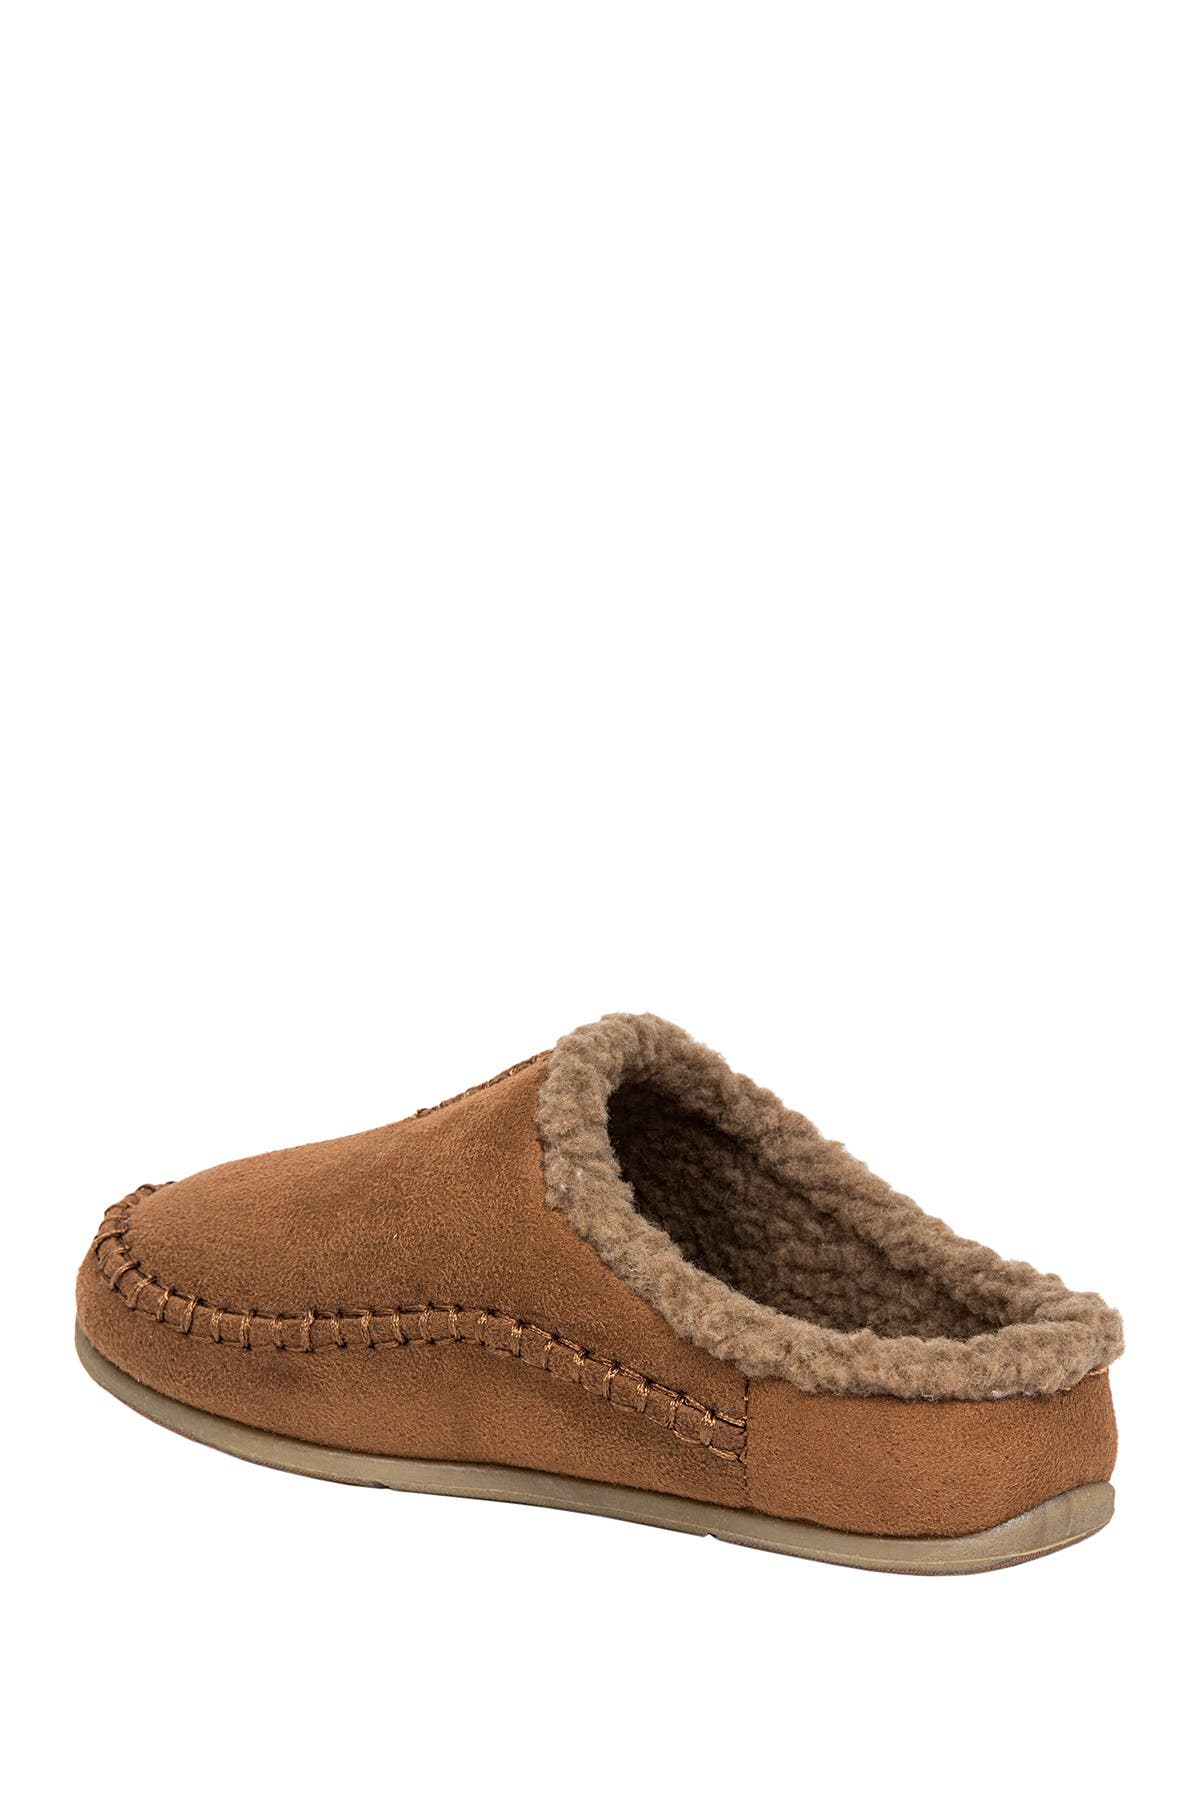 Deer Stags Kids' Slipperooz Lil' Nordic Faux Shearling Lined Slipper In Rust/copper3